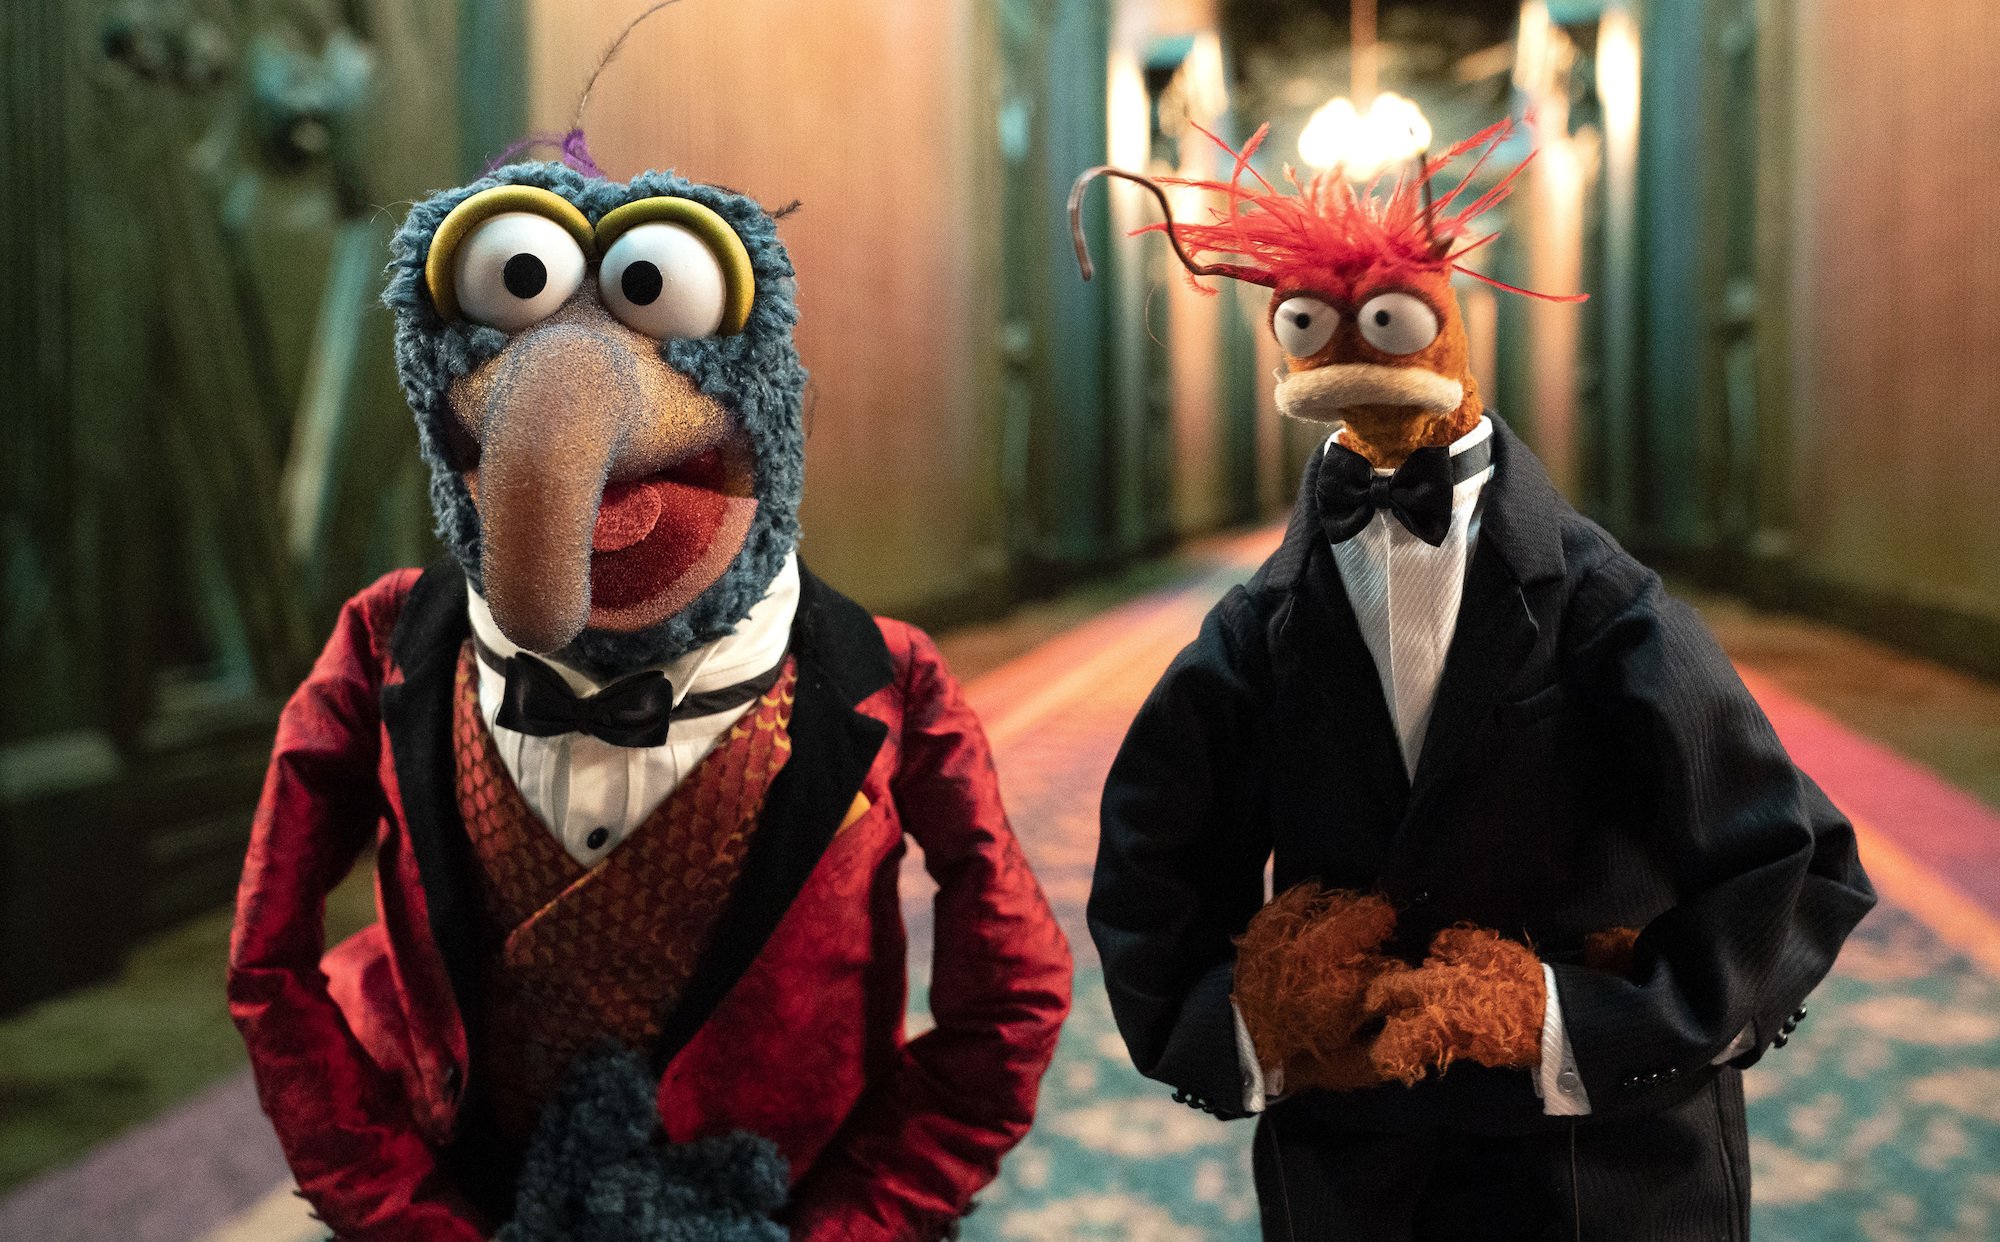 Gonzo and Pepe enter the Muppets Haunted Mansion on Disney+